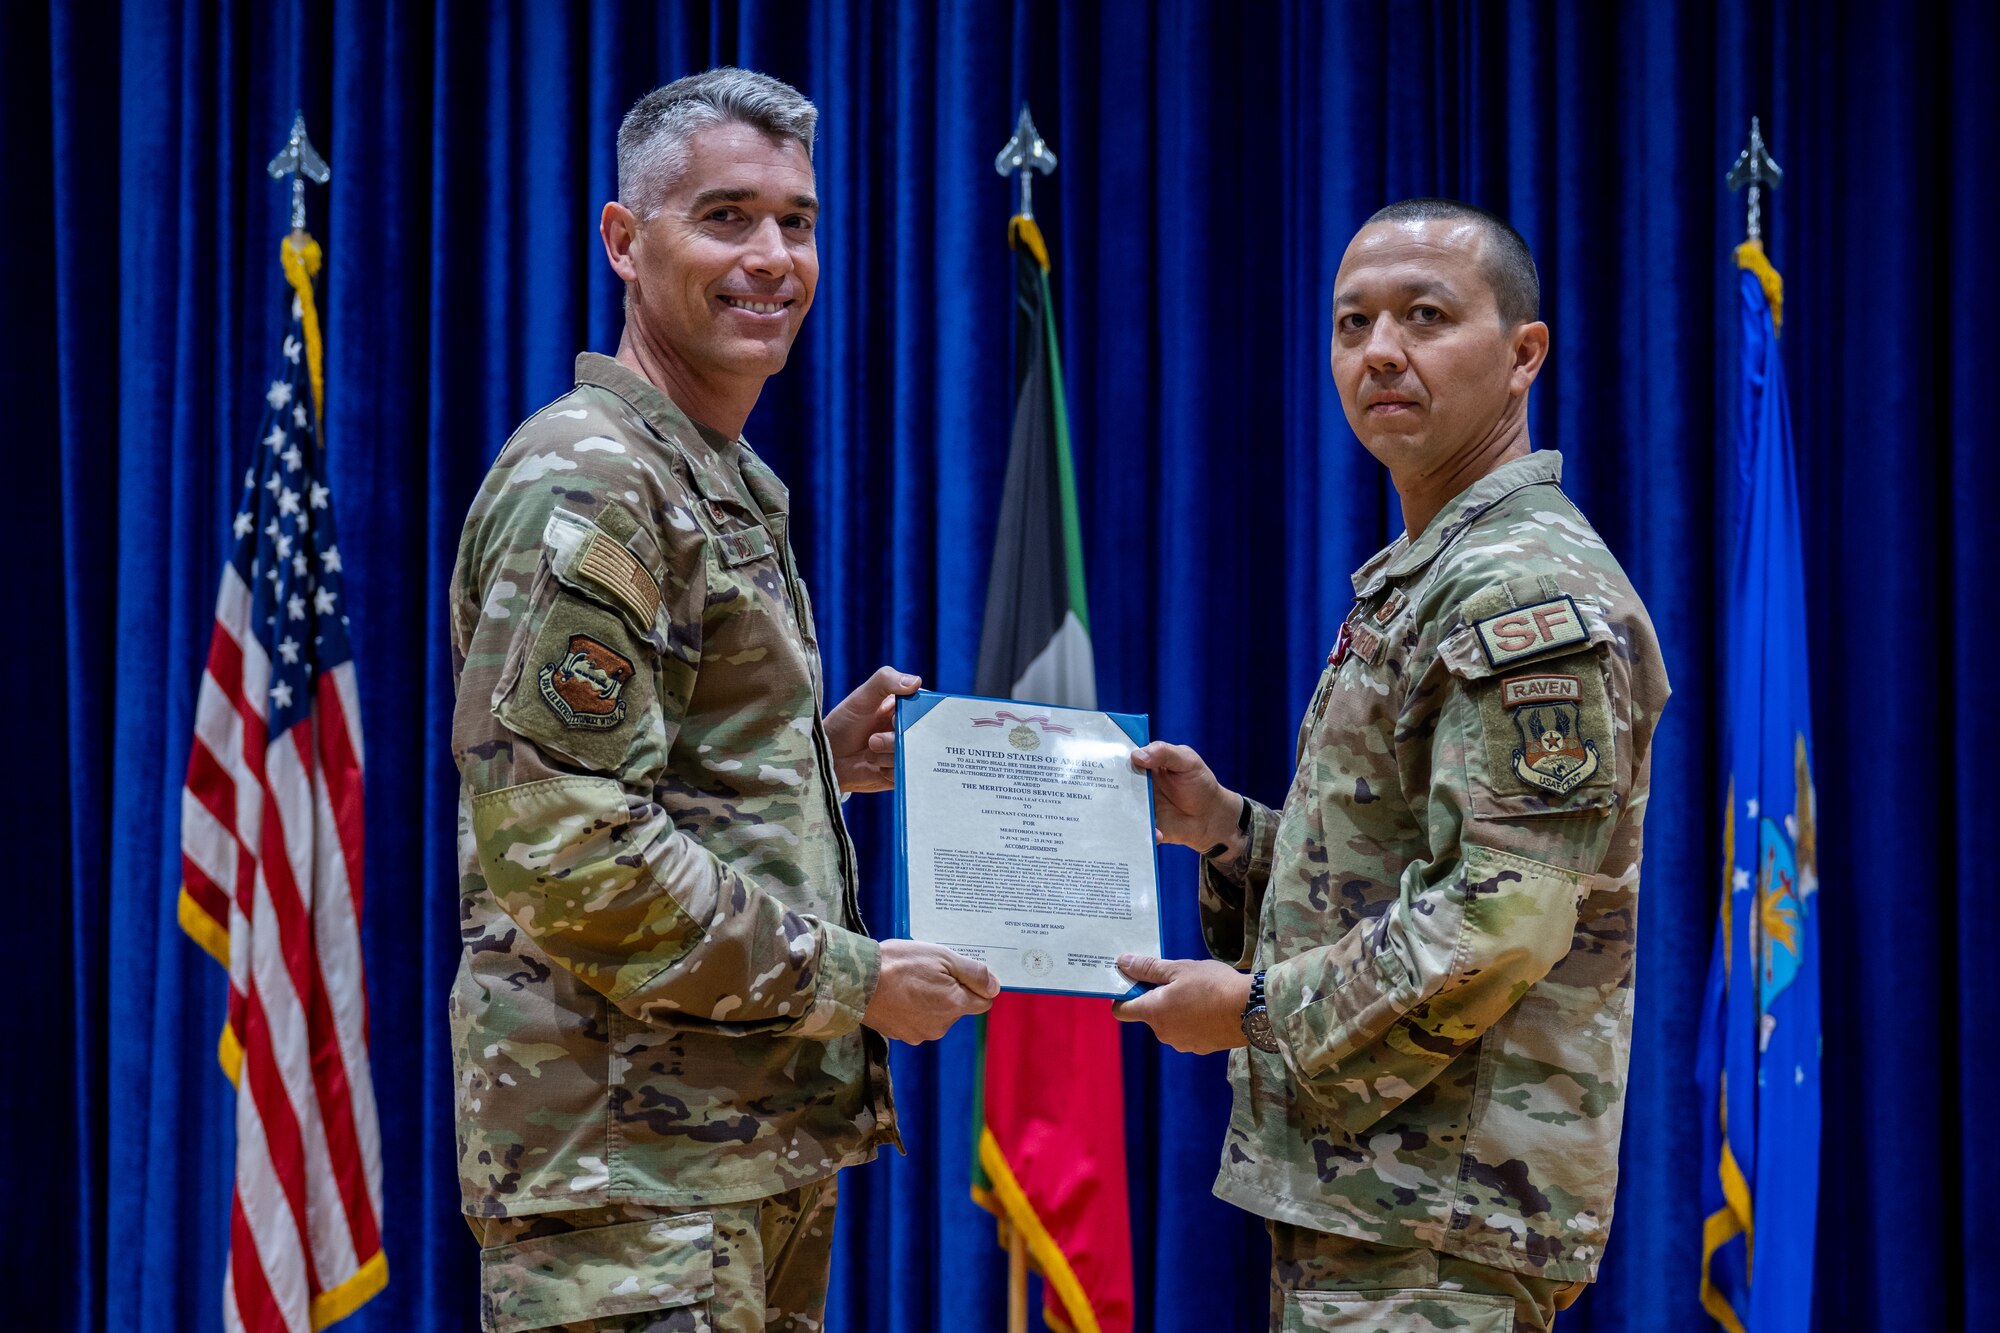 U.S. Air Force Col. George Buch, Jr., 386th Air Expeditionary Wing commander, presents a Meritorious Service Medal to Lt. Col. Tito Ruiz, outgoing 386th Security Forces Squadron commander, during a change of command ceremony at Ali Al Salem Air Base, Kuwait, June 23, 2023. The medal was presented in recognition of Ruiz’s accomplishments after a year-long command of the 386th ESFS. (U.S. Air Force photo by Staff Sgt. Kevin Long)